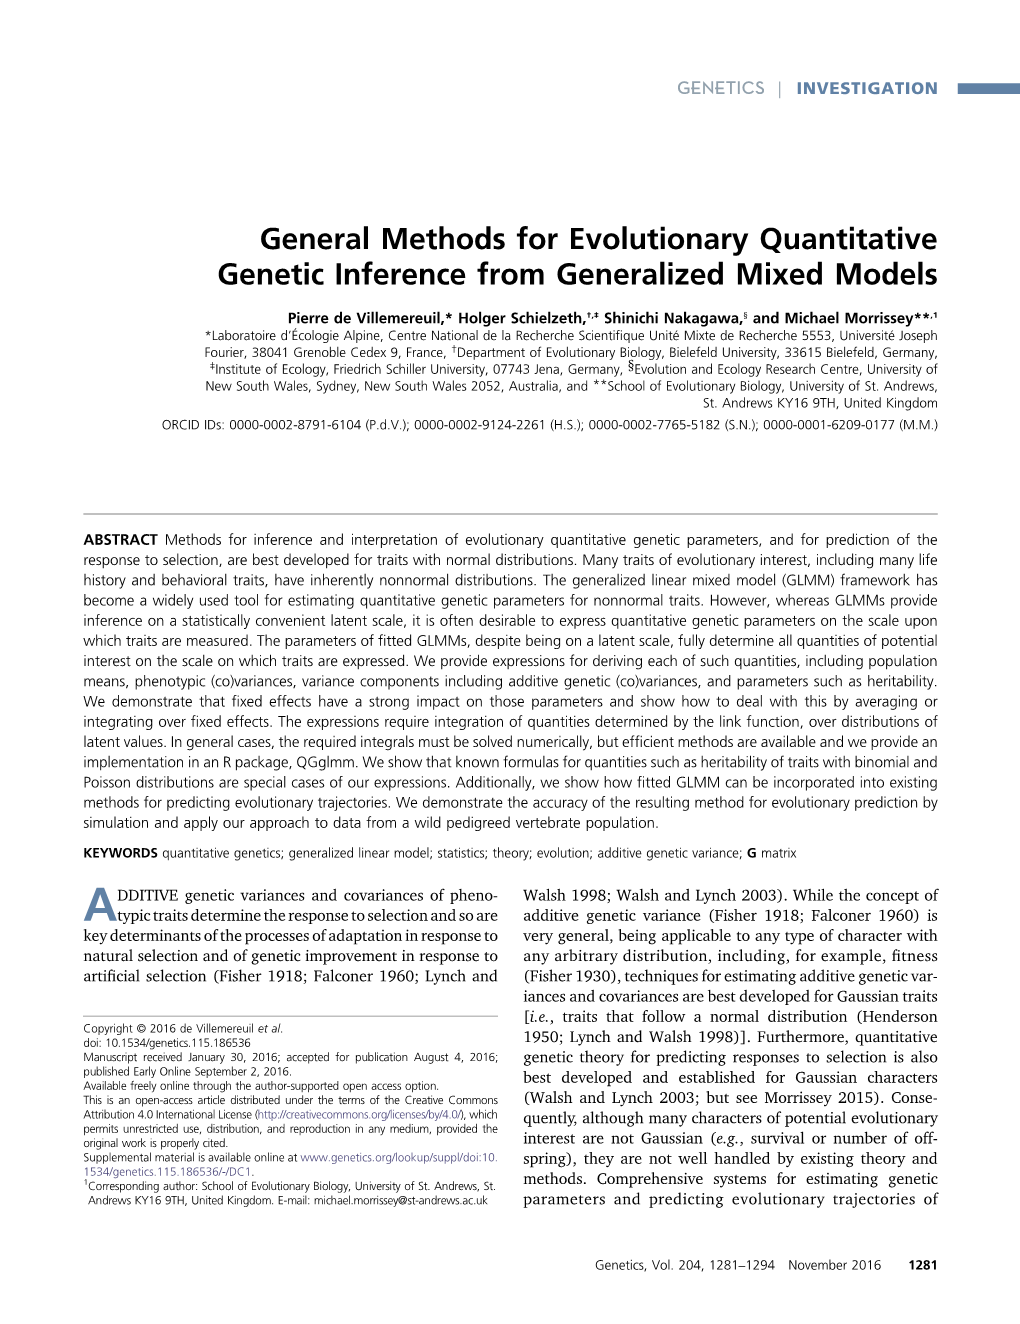 General Methods for Evolutionary Quantitative Genetic Inference from Generalized Mixed Models